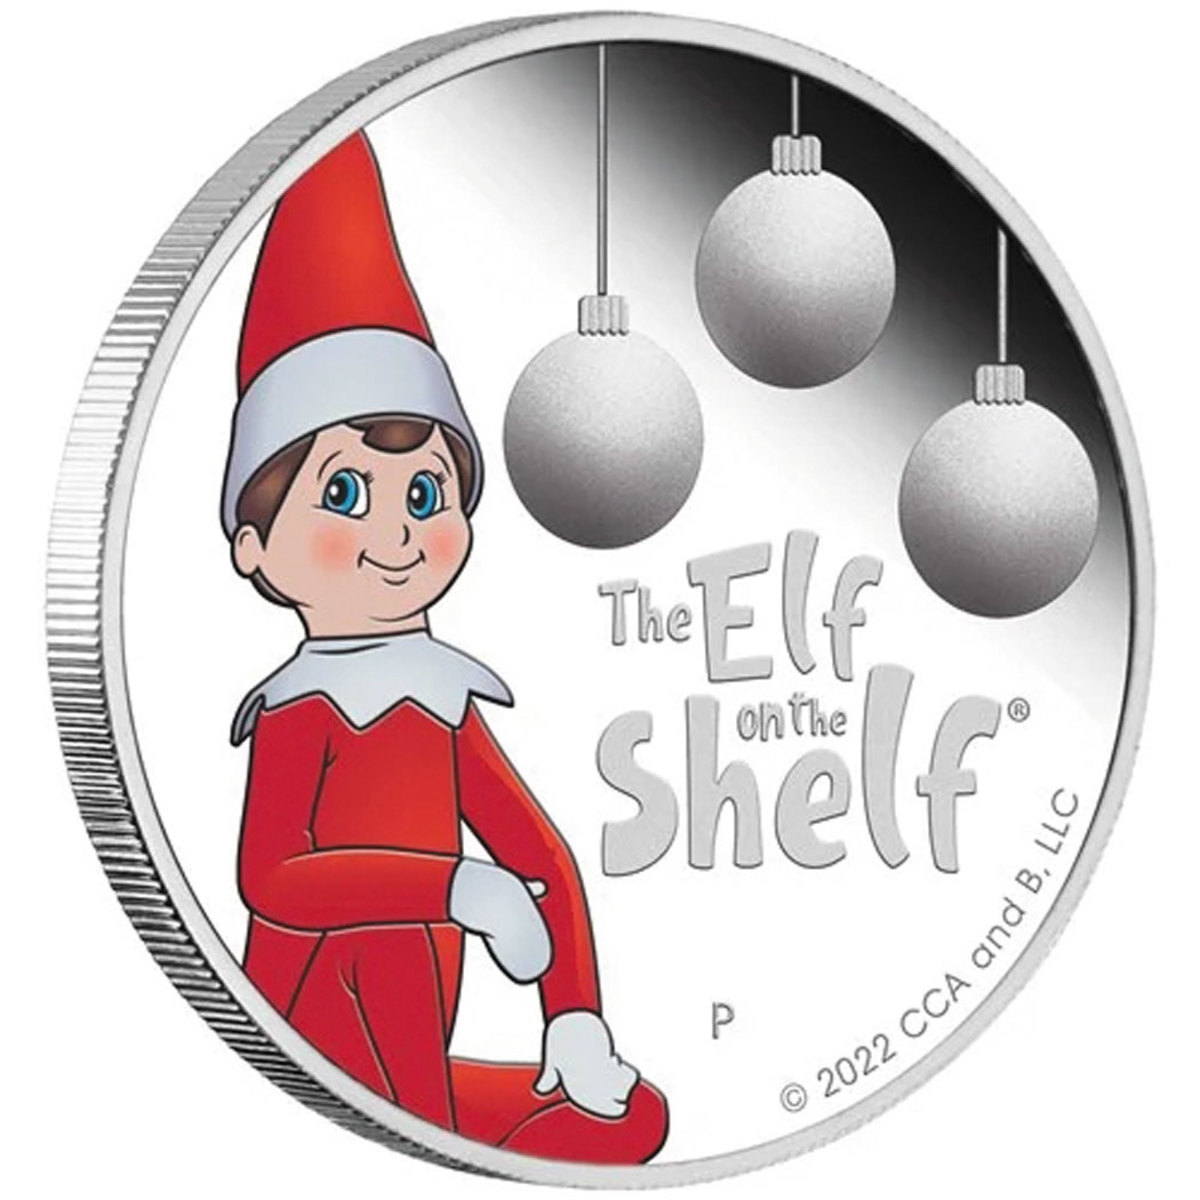 The Elf on the Shelf® has found its way onto a coin. See if you and the collector in your life can find this sneaky elf before Christmas! (Image courtesy Perth Mint.) 